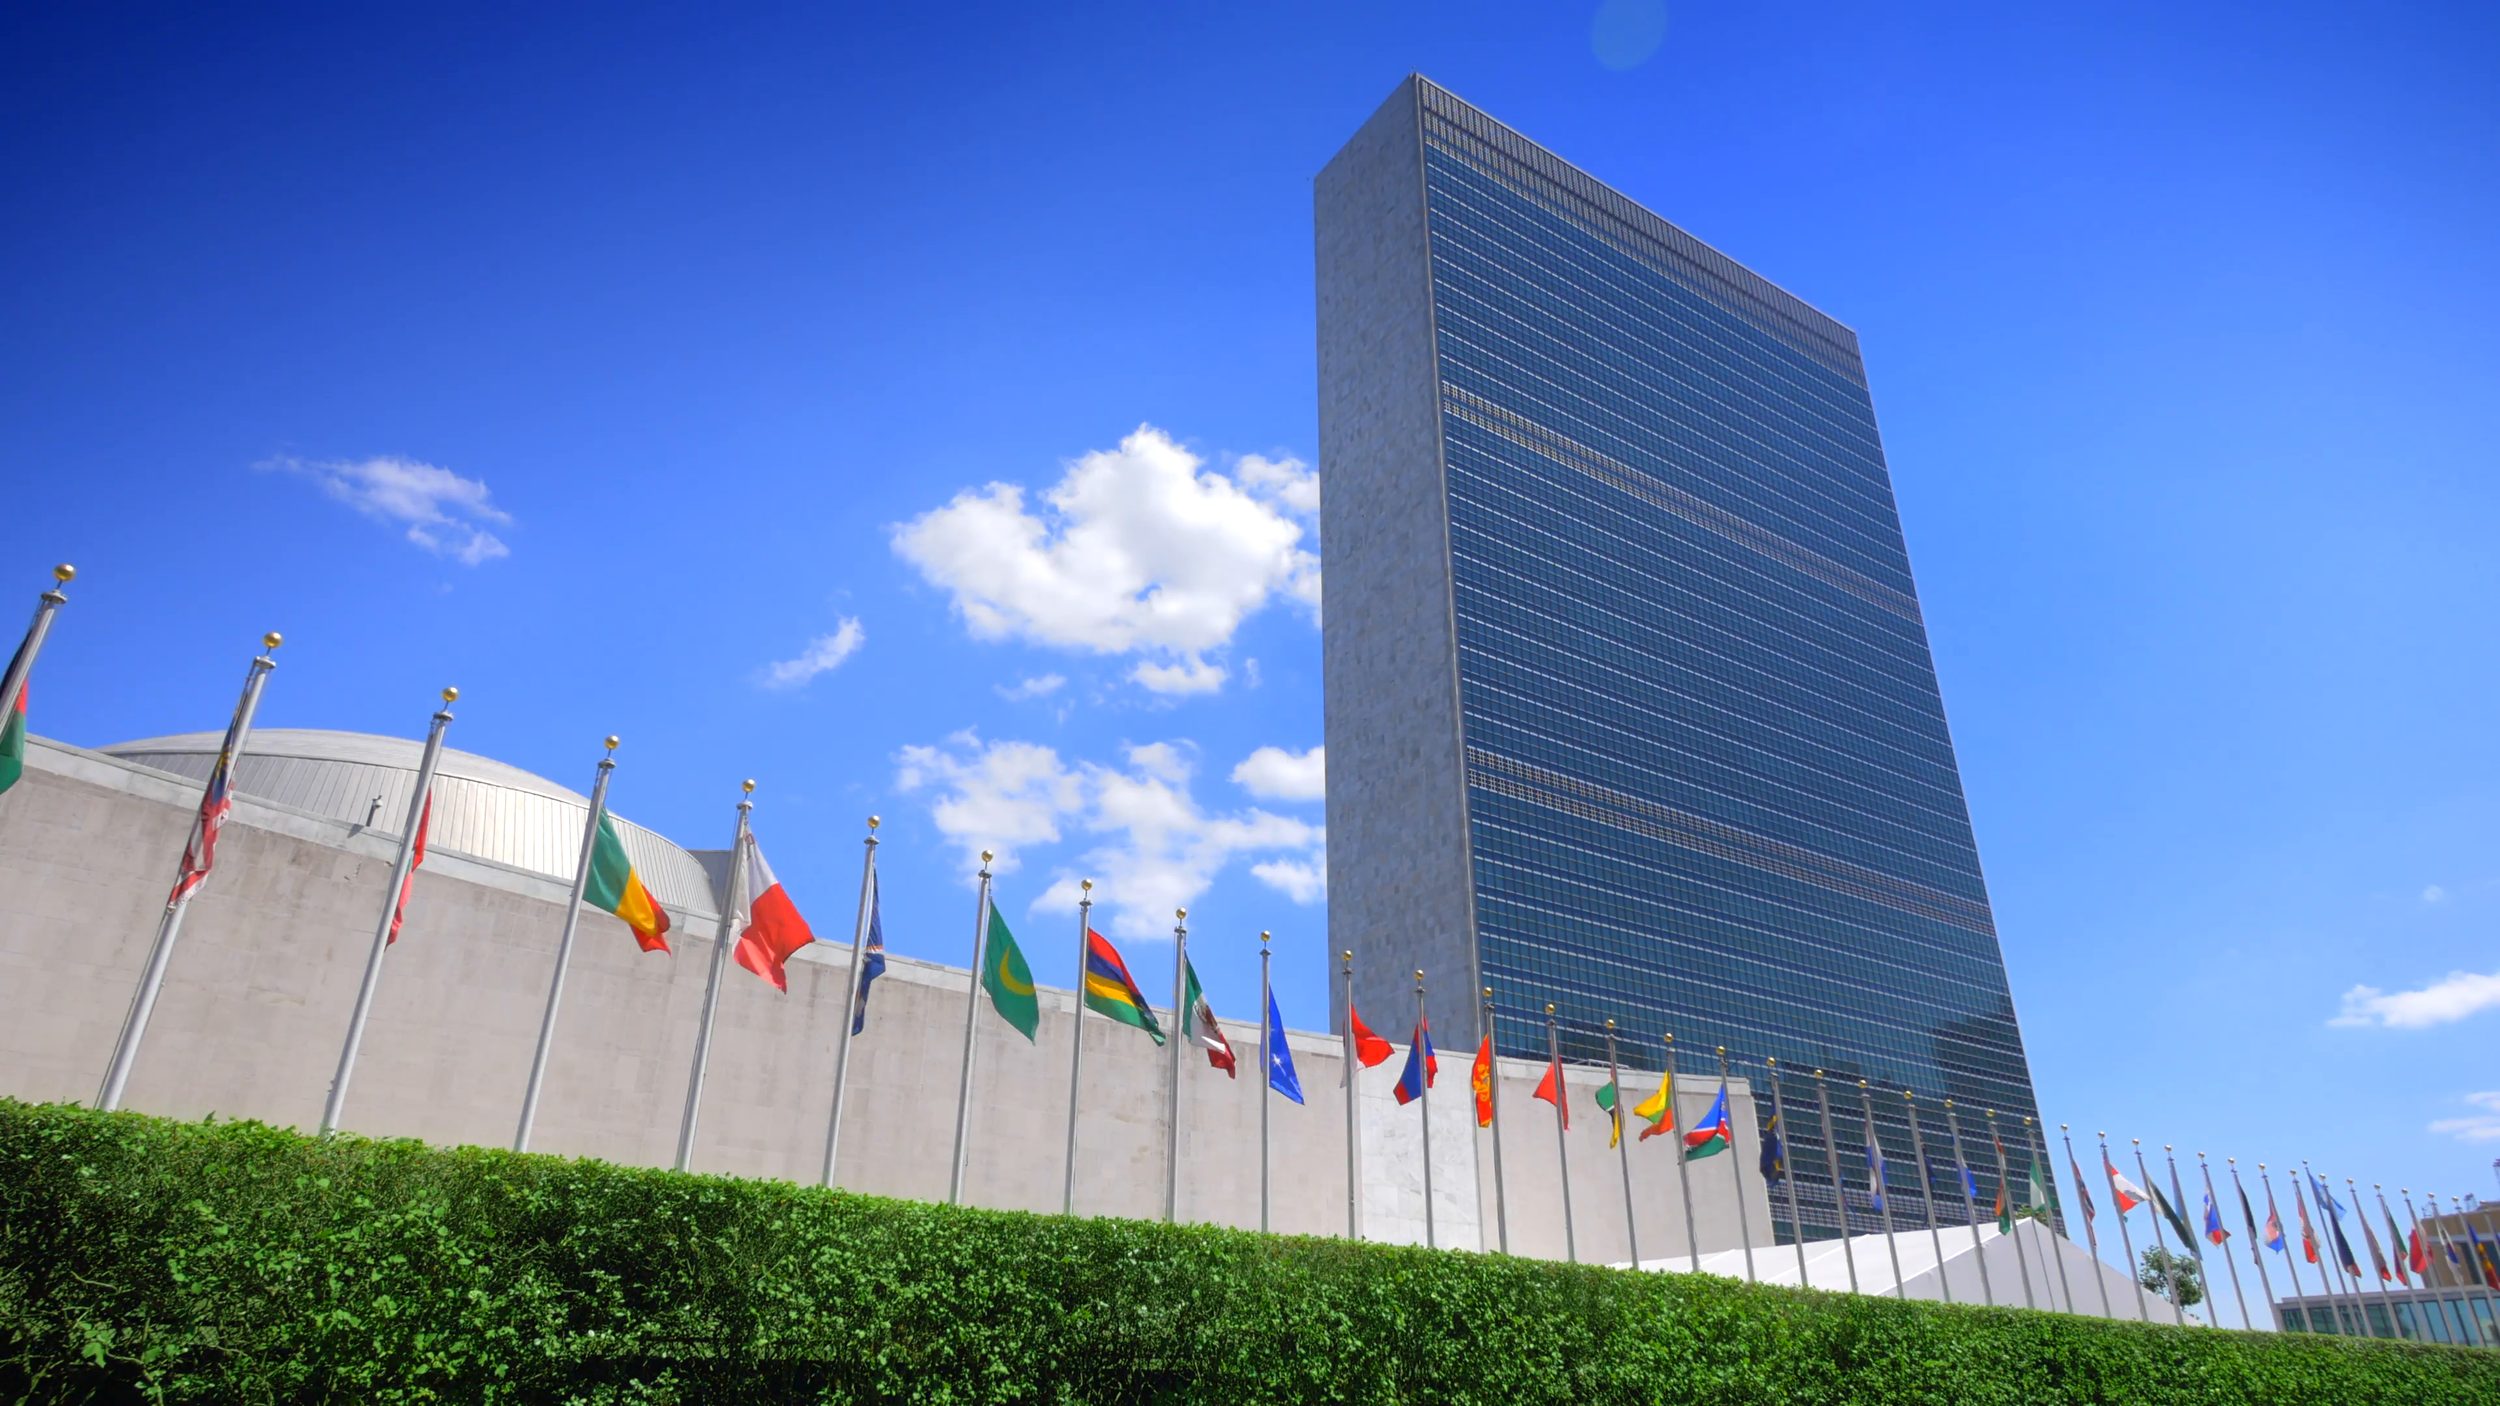 nyc-united-nations-building-headquarters-in-new-york-city-and-flags-of-the-members-countries_vykmtlhn__F0000.png